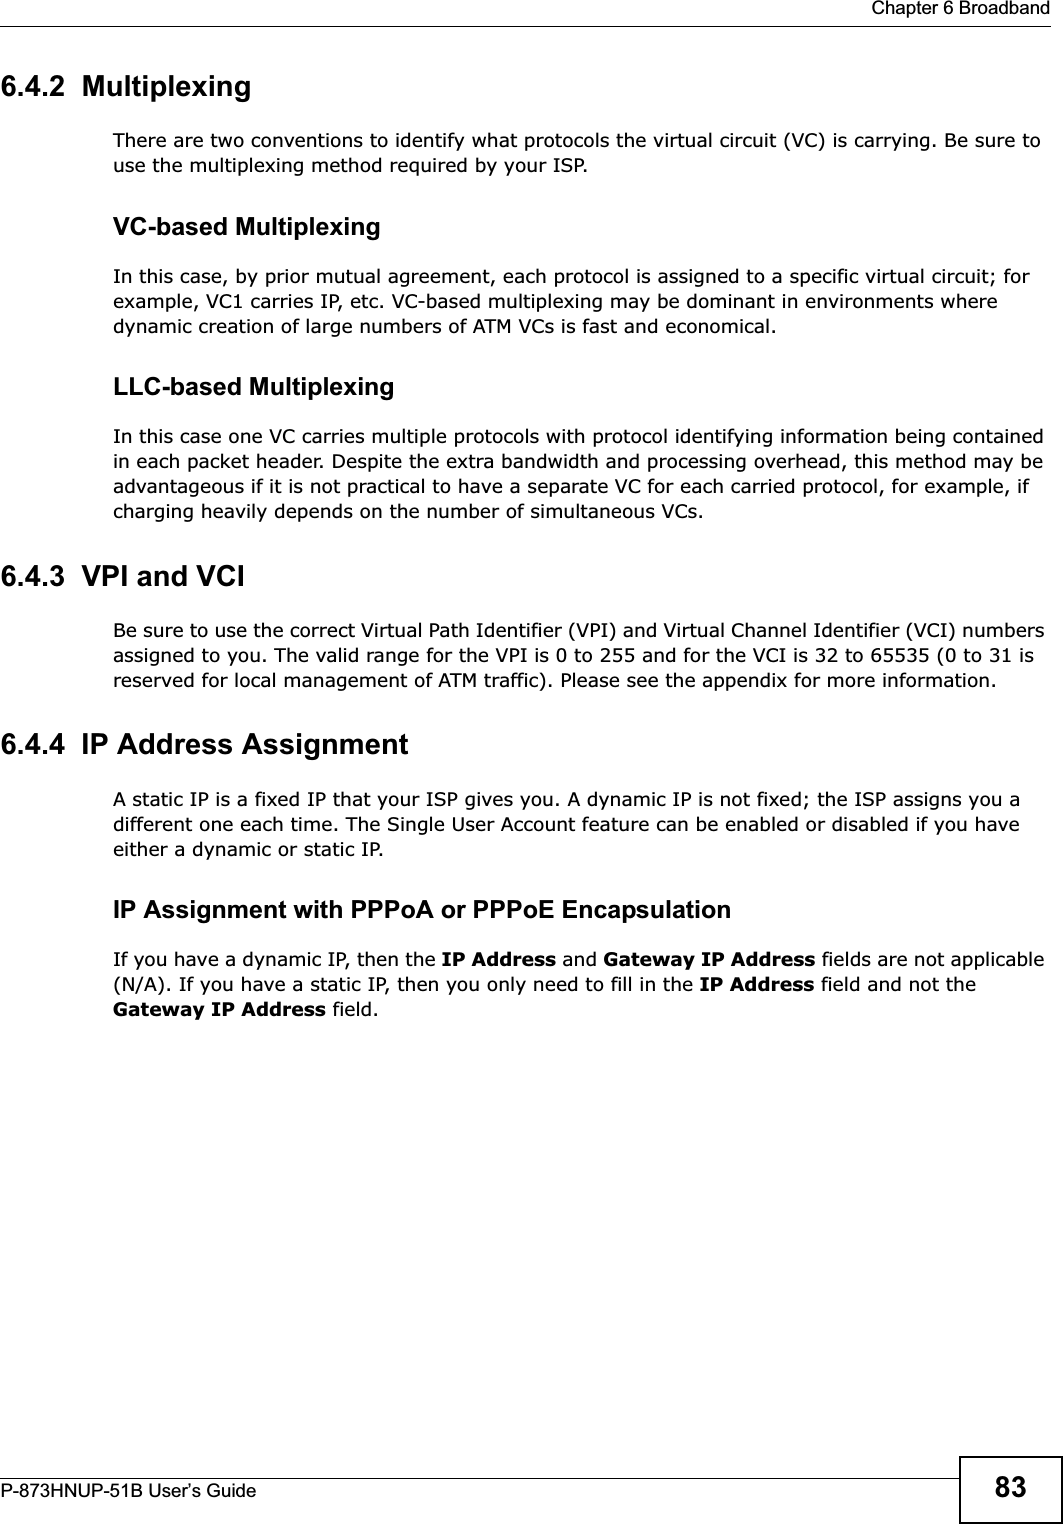  Chapter 6 BroadbandP-873HNUP-51B User’s Guide 836.4.2  MultiplexingThere are two conventions to identify what protocols the virtual circuit (VC) is carrying. Be sure to use the multiplexing method required by your ISP.VC-based MultiplexingIn this case, by prior mutual agreement, each protocol is assigned to a specific virtual circuit; for example, VC1 carries IP, etc. VC-based multiplexing may be dominant in environments where dynamic creation of large numbers of ATM VCs is fast and economical.LLC-based MultiplexingIn this case one VC carries multiple protocols with protocol identifying information being contained in each packet header. Despite the extra bandwidth and processing overhead, this method may be advantageous if it is not practical to have a separate VC for each carried protocol, for example, if charging heavily depends on the number of simultaneous VCs.6.4.3  VPI and VCIBe sure to use the correct Virtual Path Identifier (VPI) and Virtual Channel Identifier (VCI) numbers assigned to you. The valid range for the VPI is 0 to 255 and for the VCI is 32 to 65535 (0 to 31 is reserved for local management of ATM traffic). Please see the appendix for more information.6.4.4  IP Address AssignmentA static IP is a fixed IP that your ISP gives you. A dynamic IP is not fixed; the ISP assigns you a different one each time. The Single User Account feature can be enabled or disabled if you have either a dynamic or static IP. IP Assignment with PPPoA or PPPoE EncapsulationIf you have a dynamic IP, then the IP Address and Gateway IP Address fields are not applicable (N/A). If you have a static IP, then you only need to fill in the IP Address field and not the Gateway IP Address field.